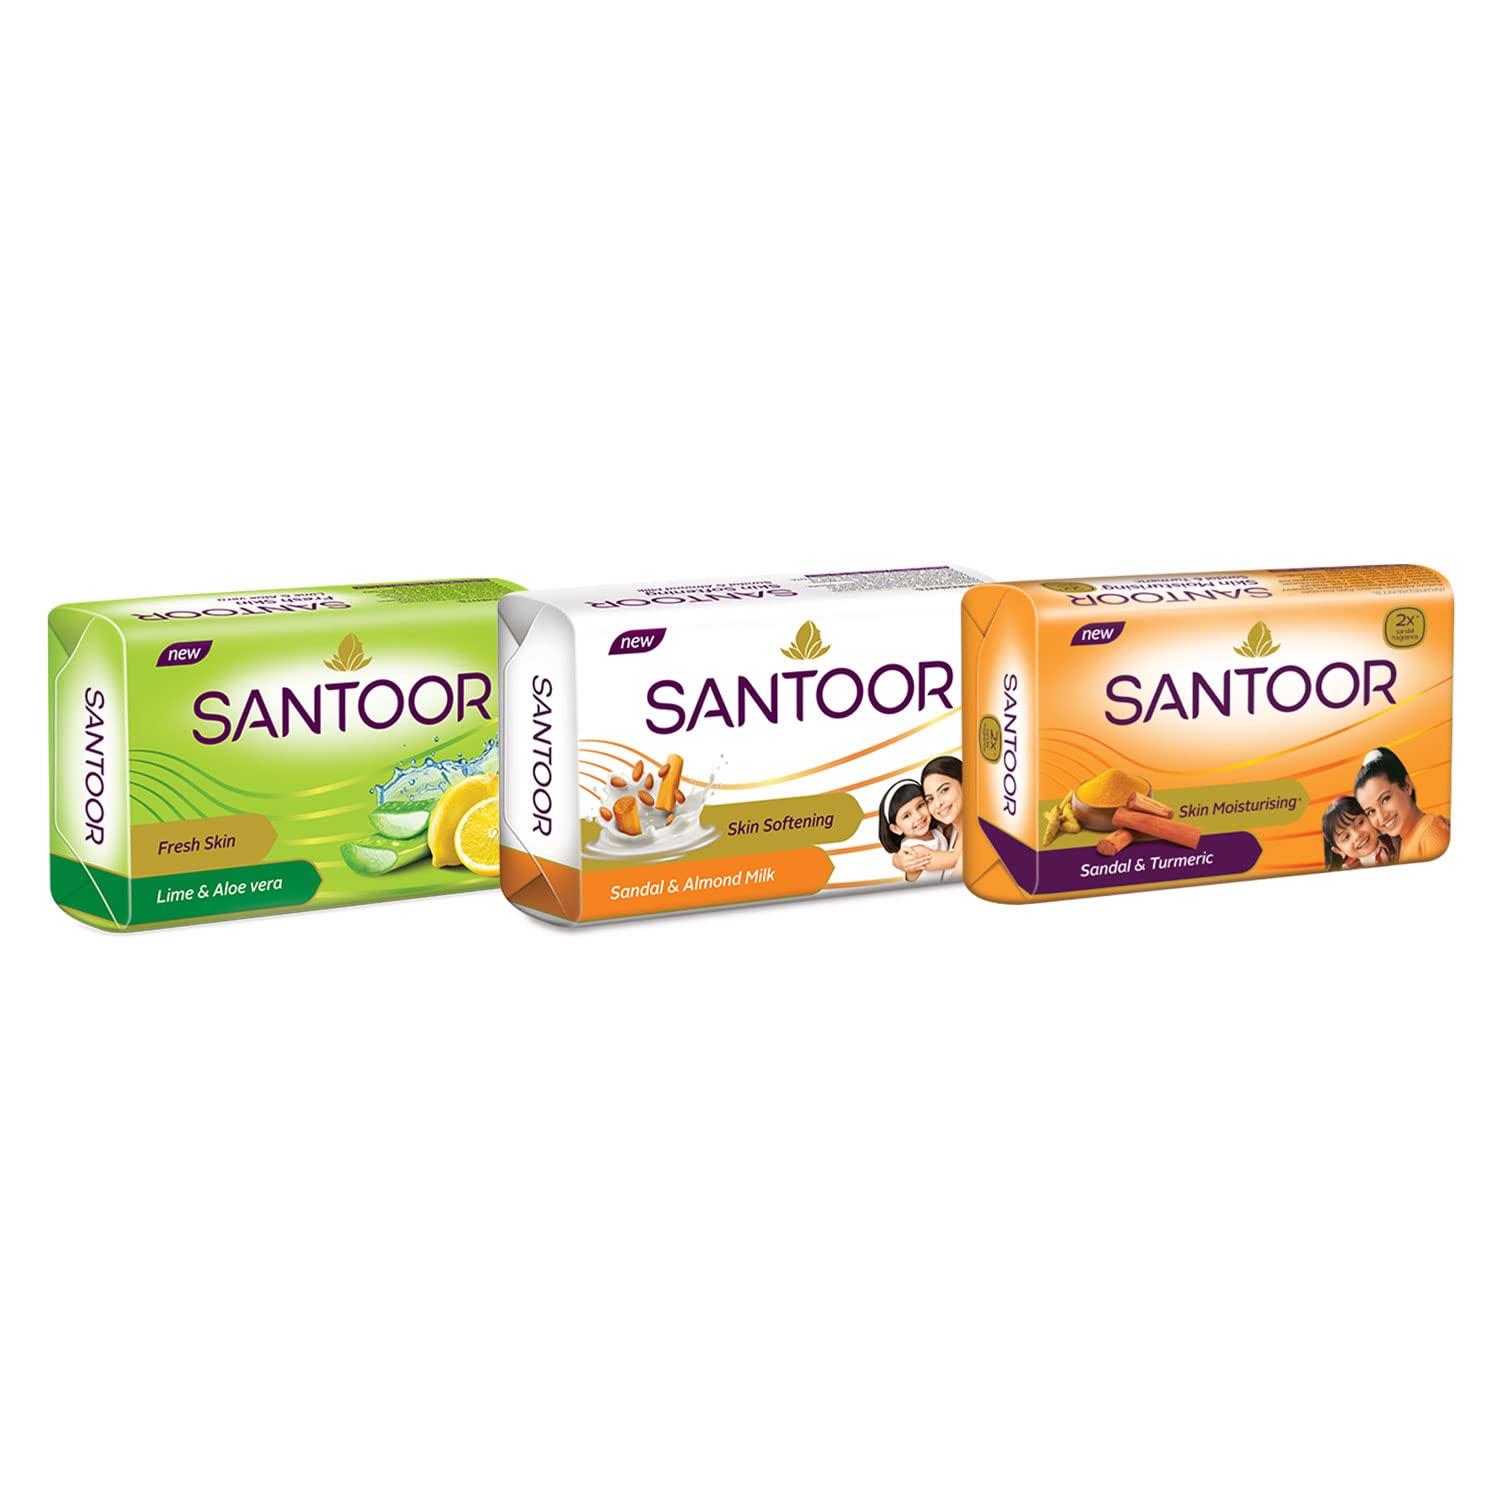 SANTOOR NEW TVC - TAMIL | Get beautiful, younger looking skin with Santoor  soap. Experience the natural benefits of Sandalwood and Turmeric which  makes your skin look younger and... | By Santoor Stay YoungFacebook